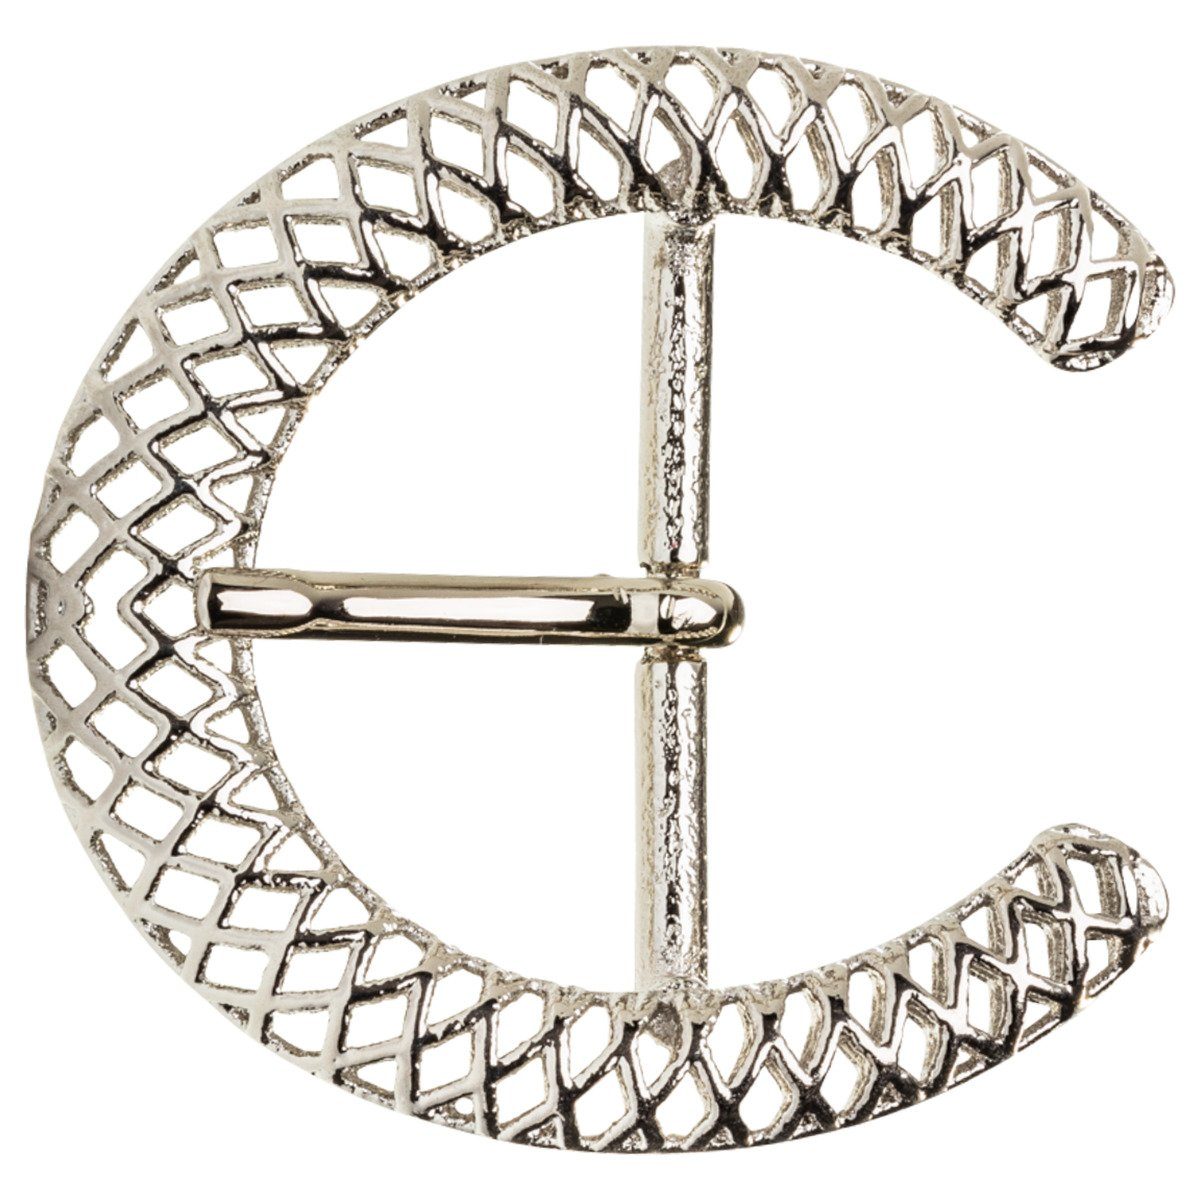 FREDERIC HERMANO Gürtelschnalle 40mm Messing Silber - Buckle Couronne - 335407500020